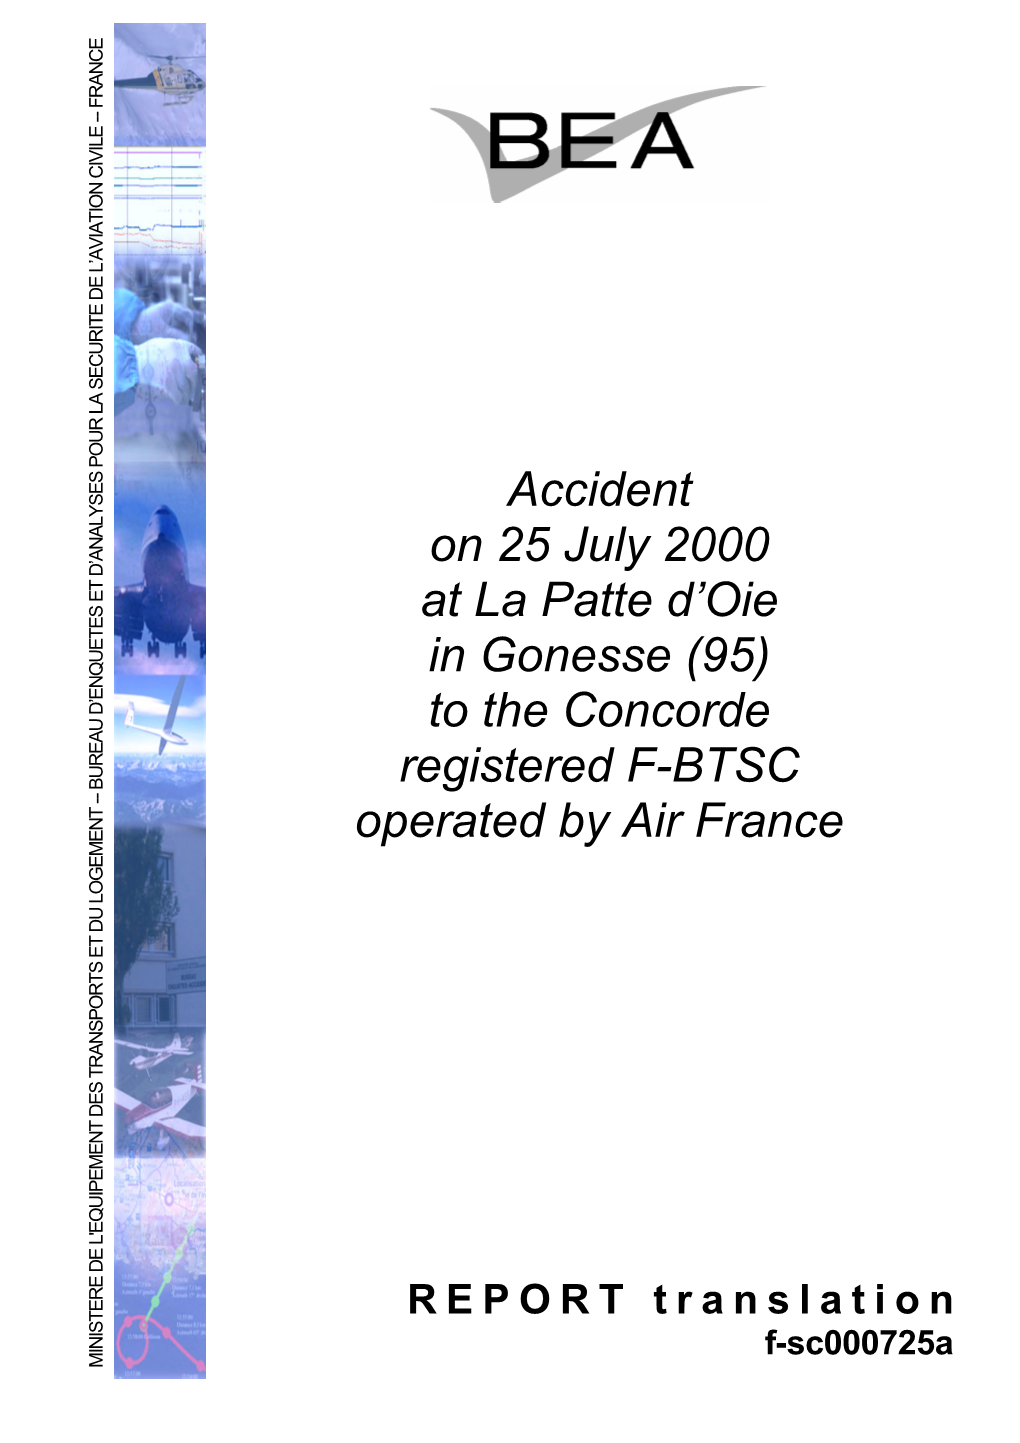 (95) to the Concorde Registered F-BTSC Operated by Air France